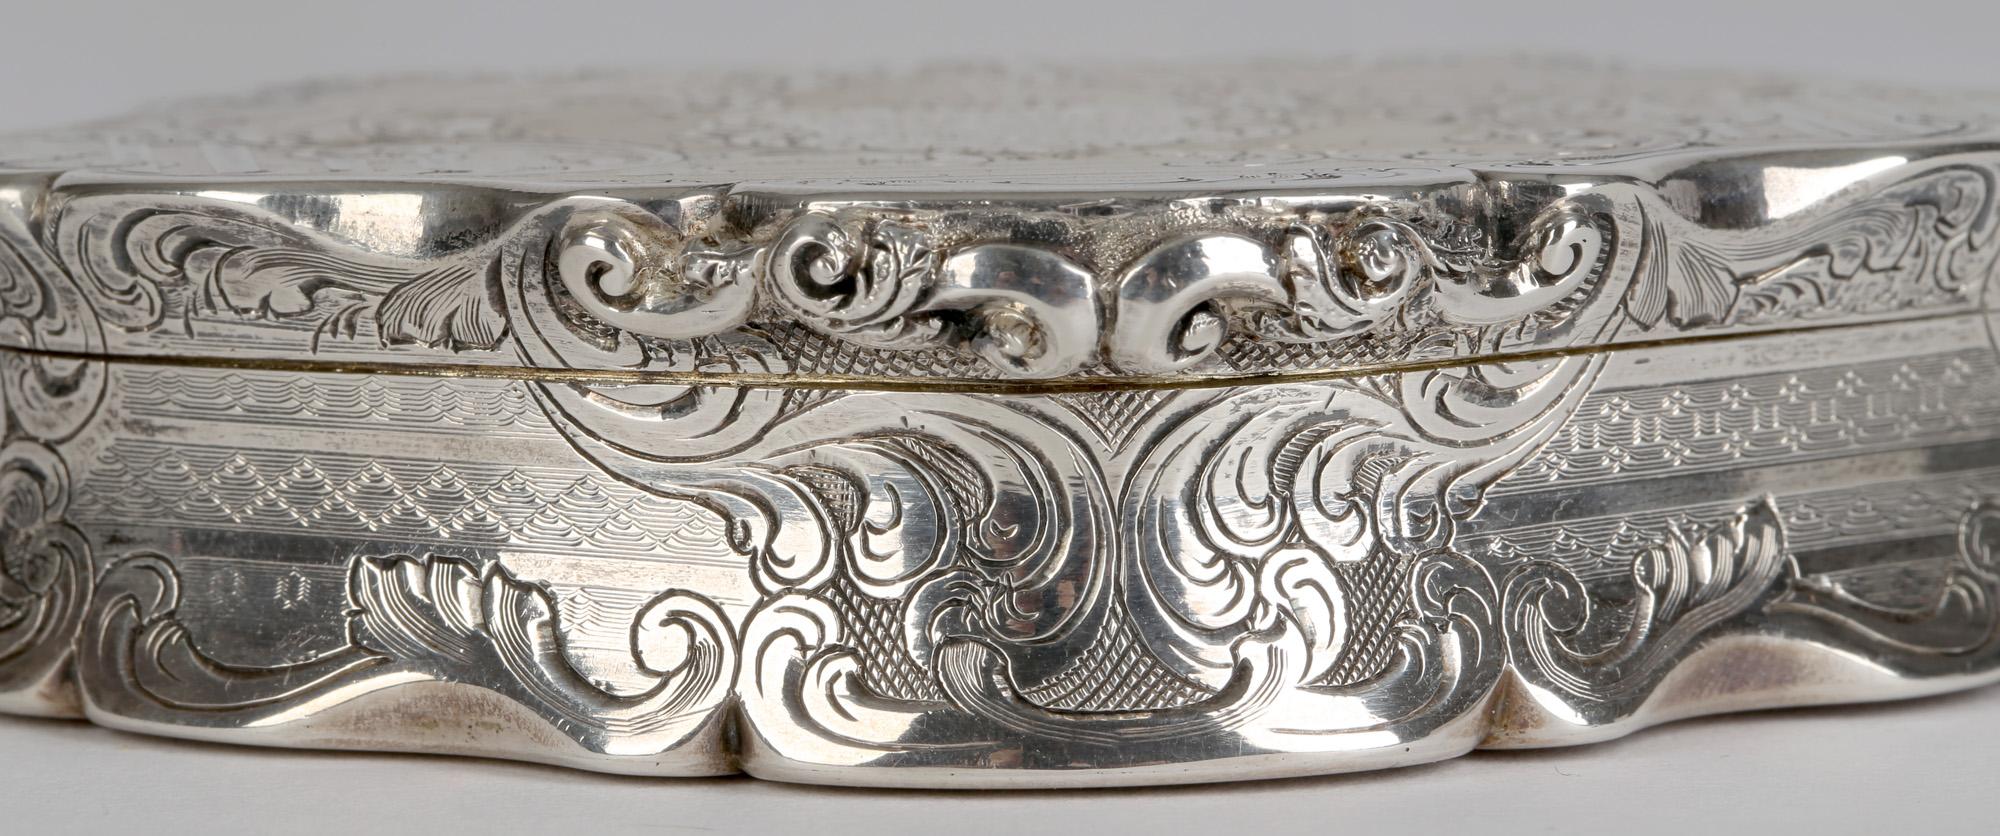 Early Victorian Silver Cased Military Interest Presentation Snuff Box 1847 For Sale